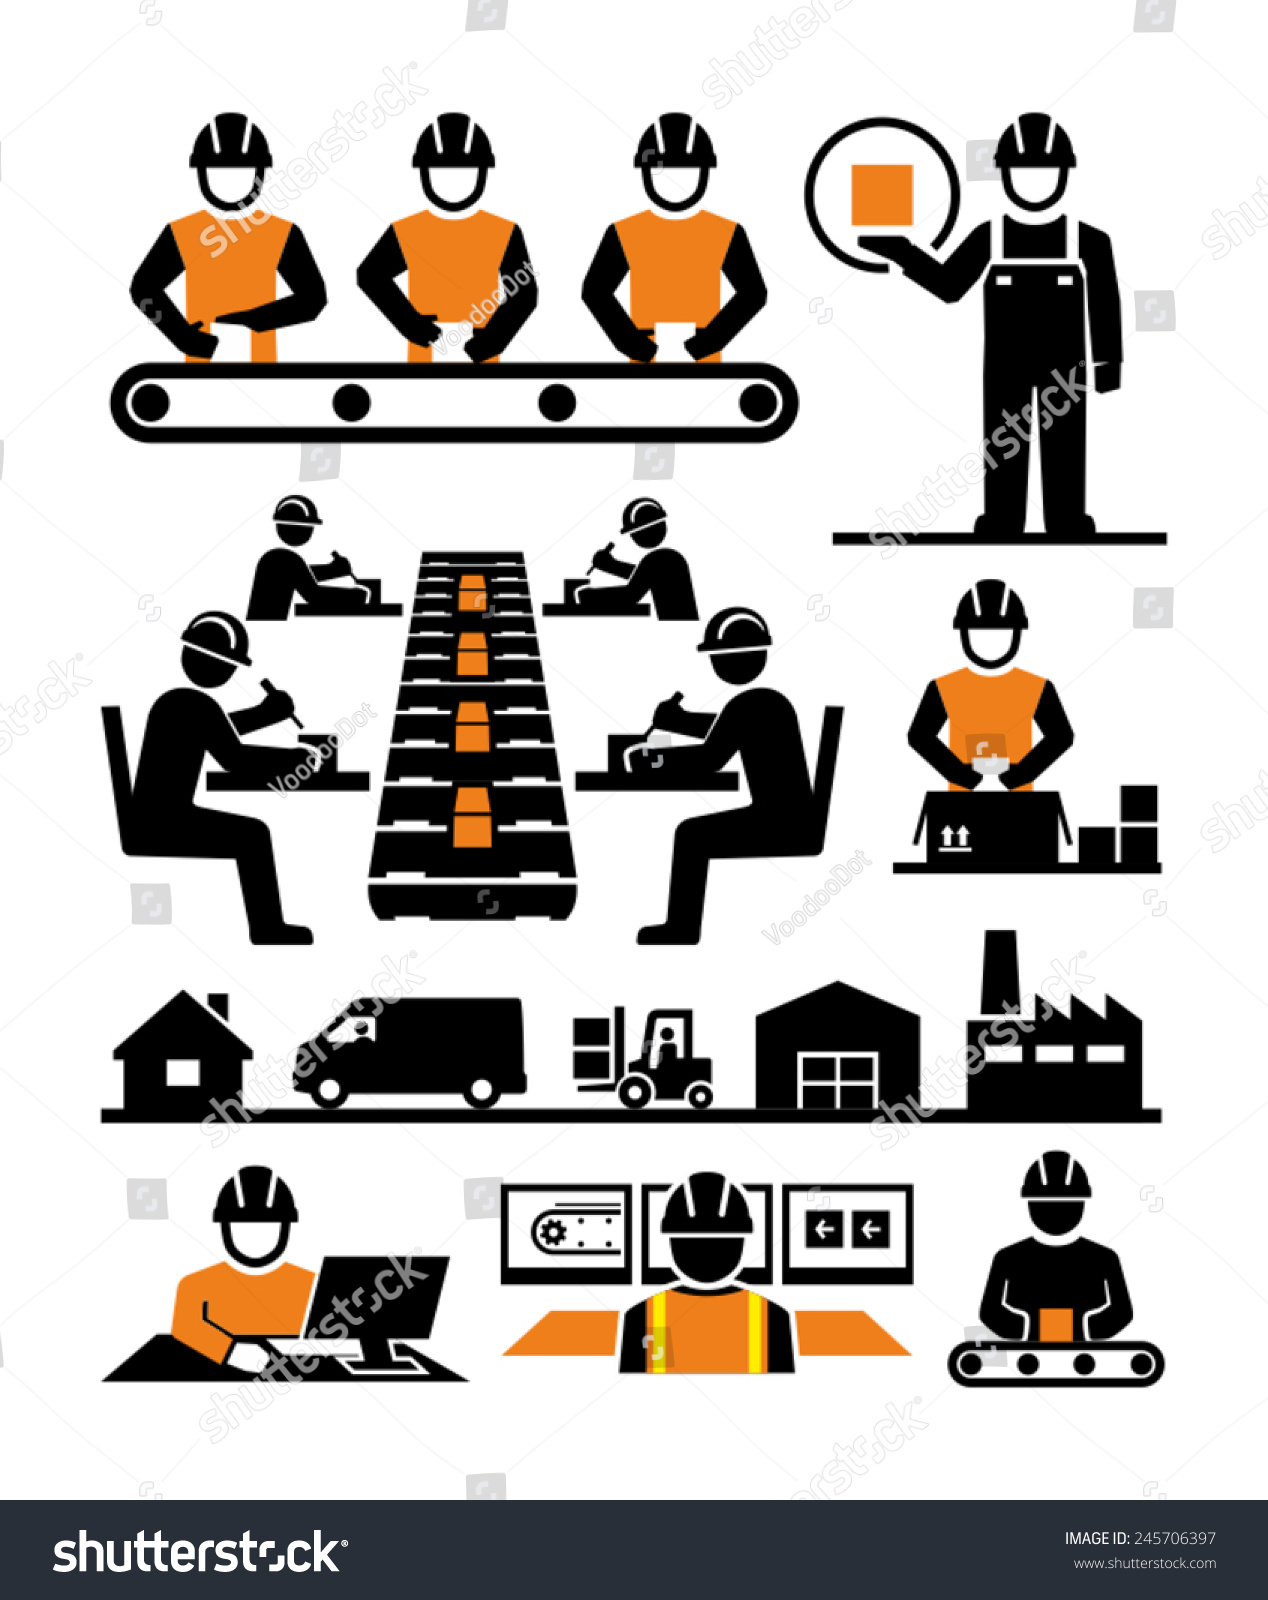 industrial worker clipart - photo #15